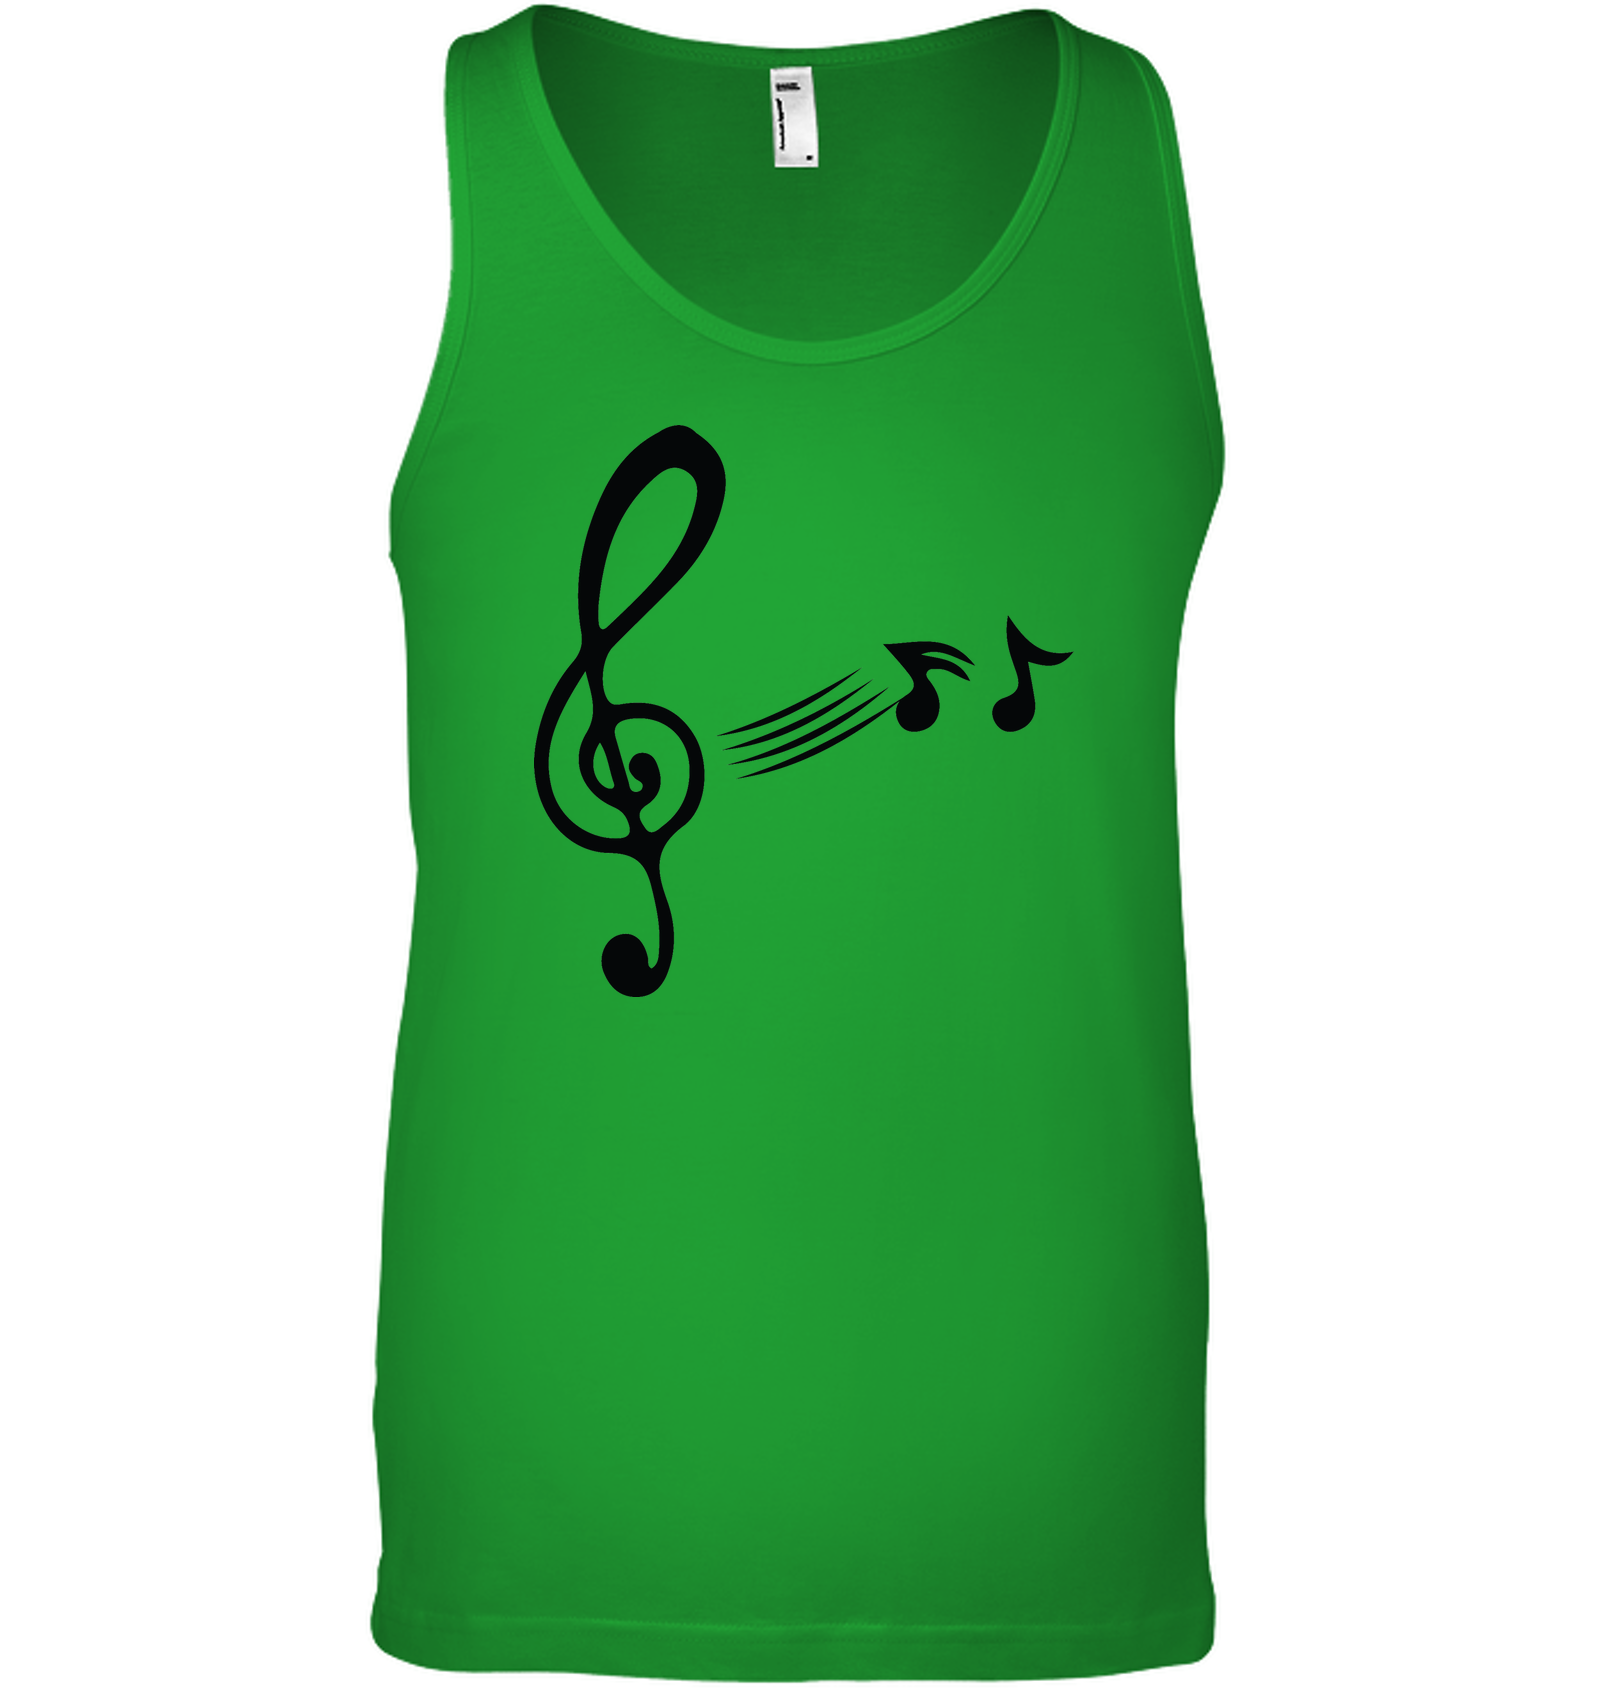 Treble Clef with floating Notes - Bella + Canvas Unisex Jersey Tank